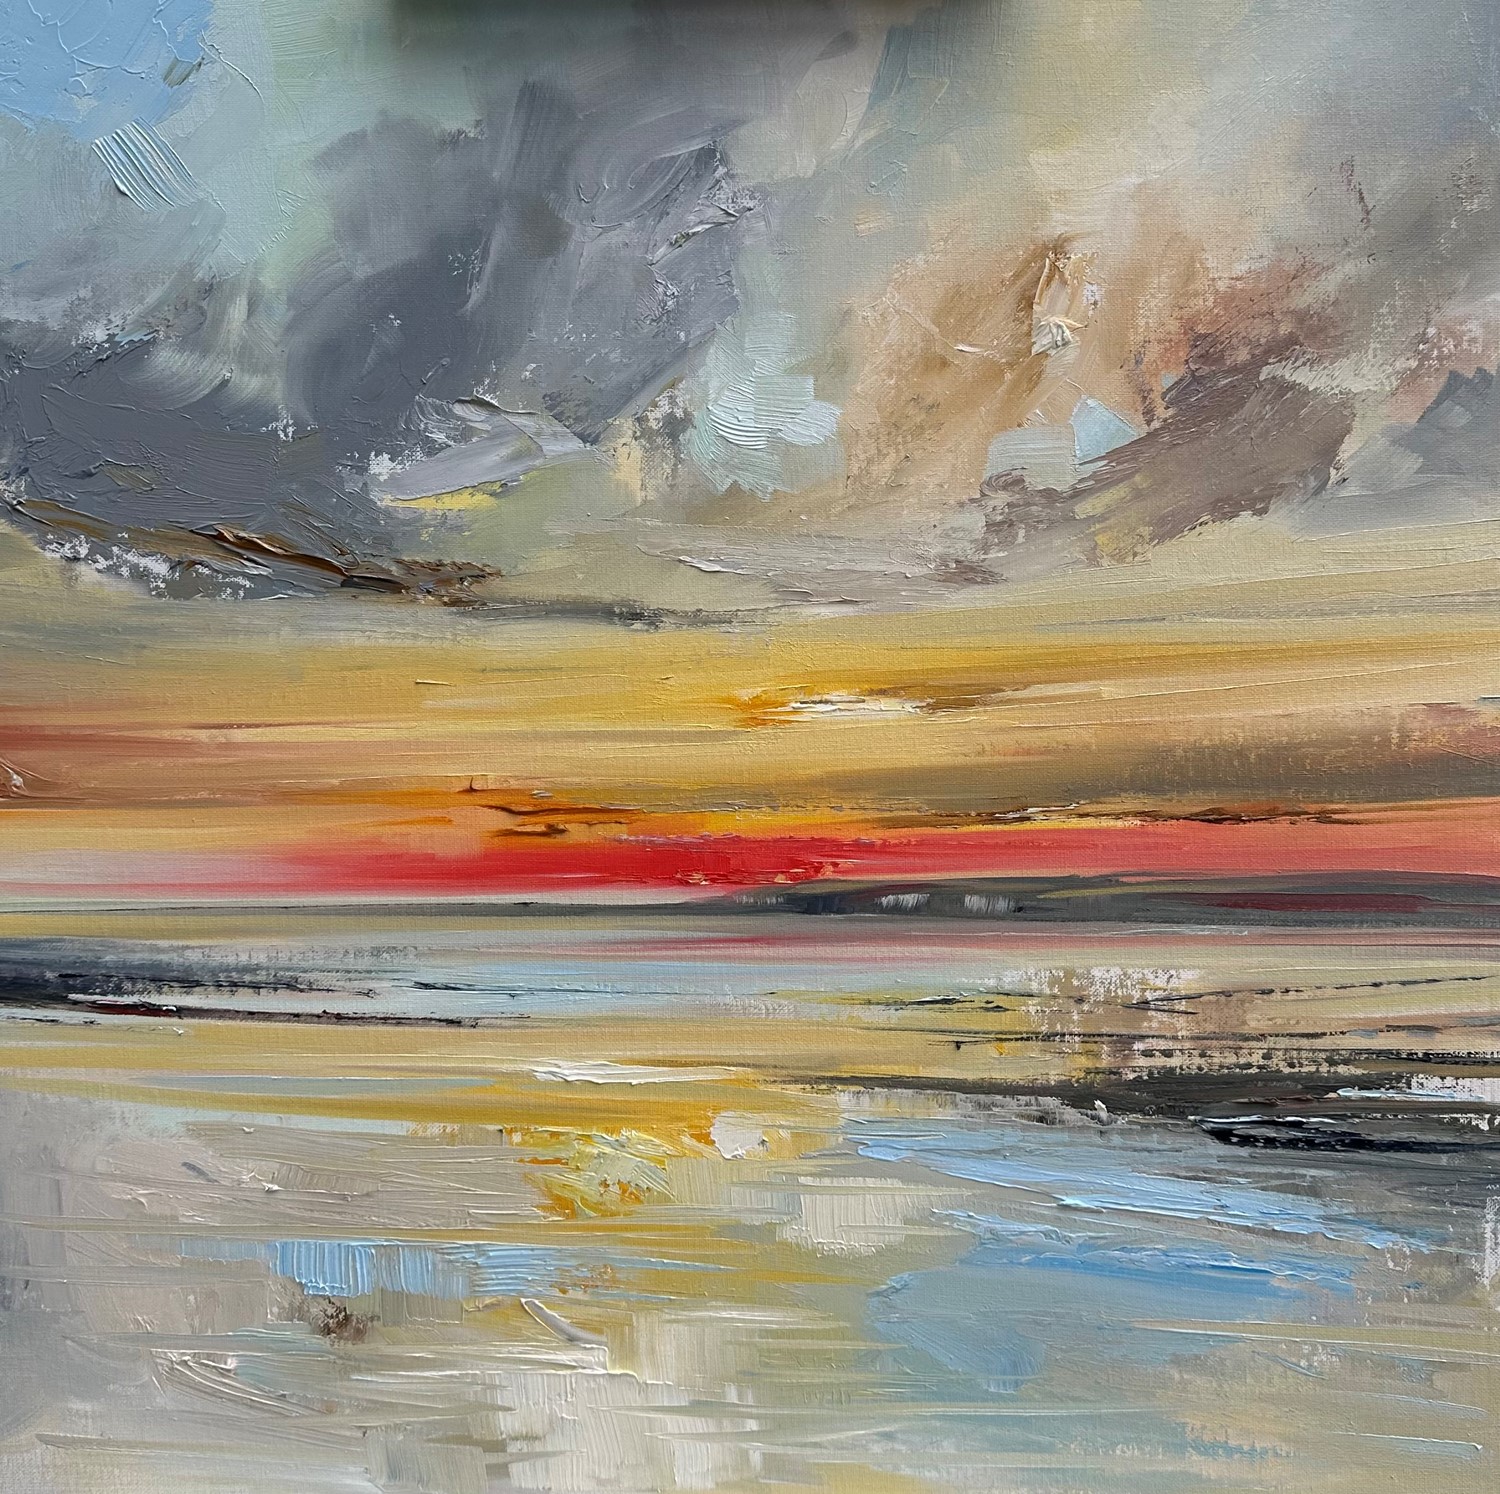 'Sunset after a passing storm' by artist Rosanne Barr